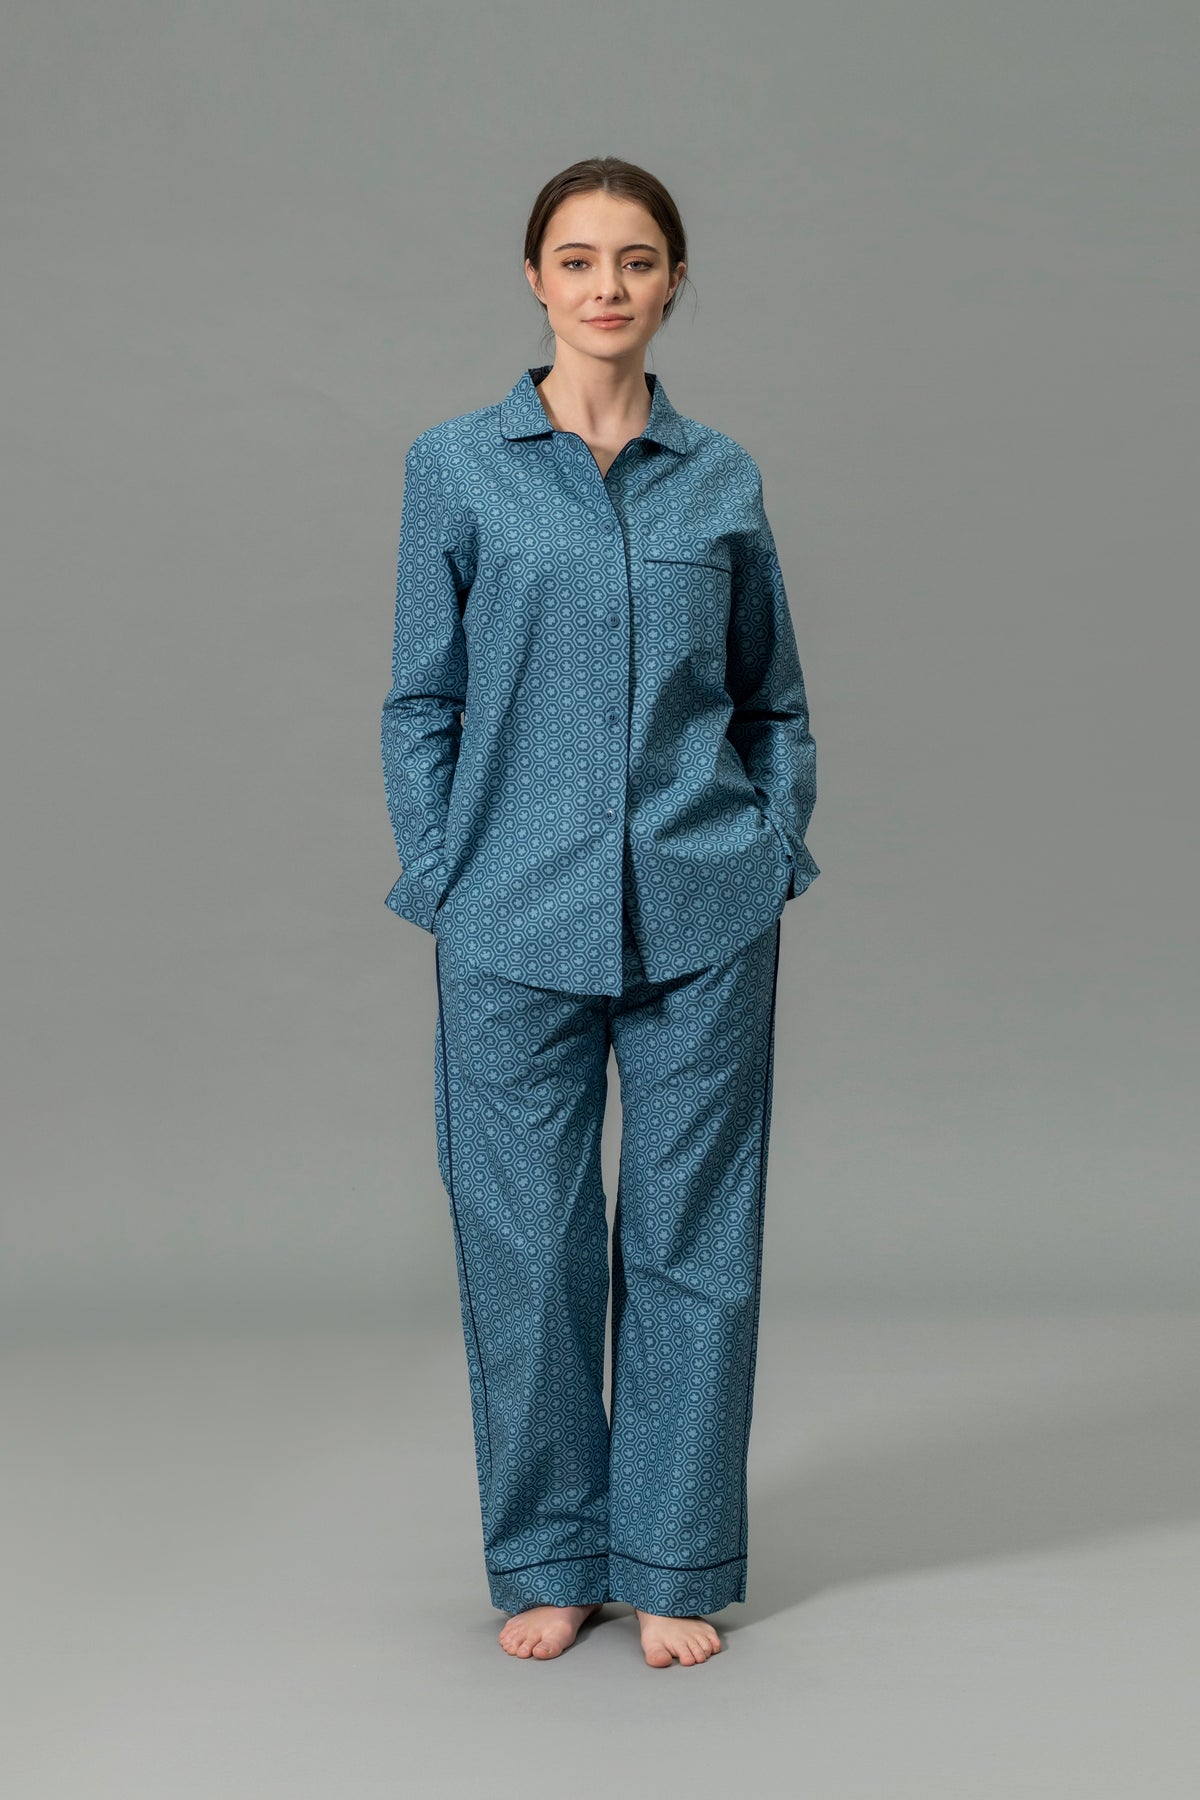 Front View of Model Wearing Matouk Luca Pajama Set in Color Levi Prussian Blue